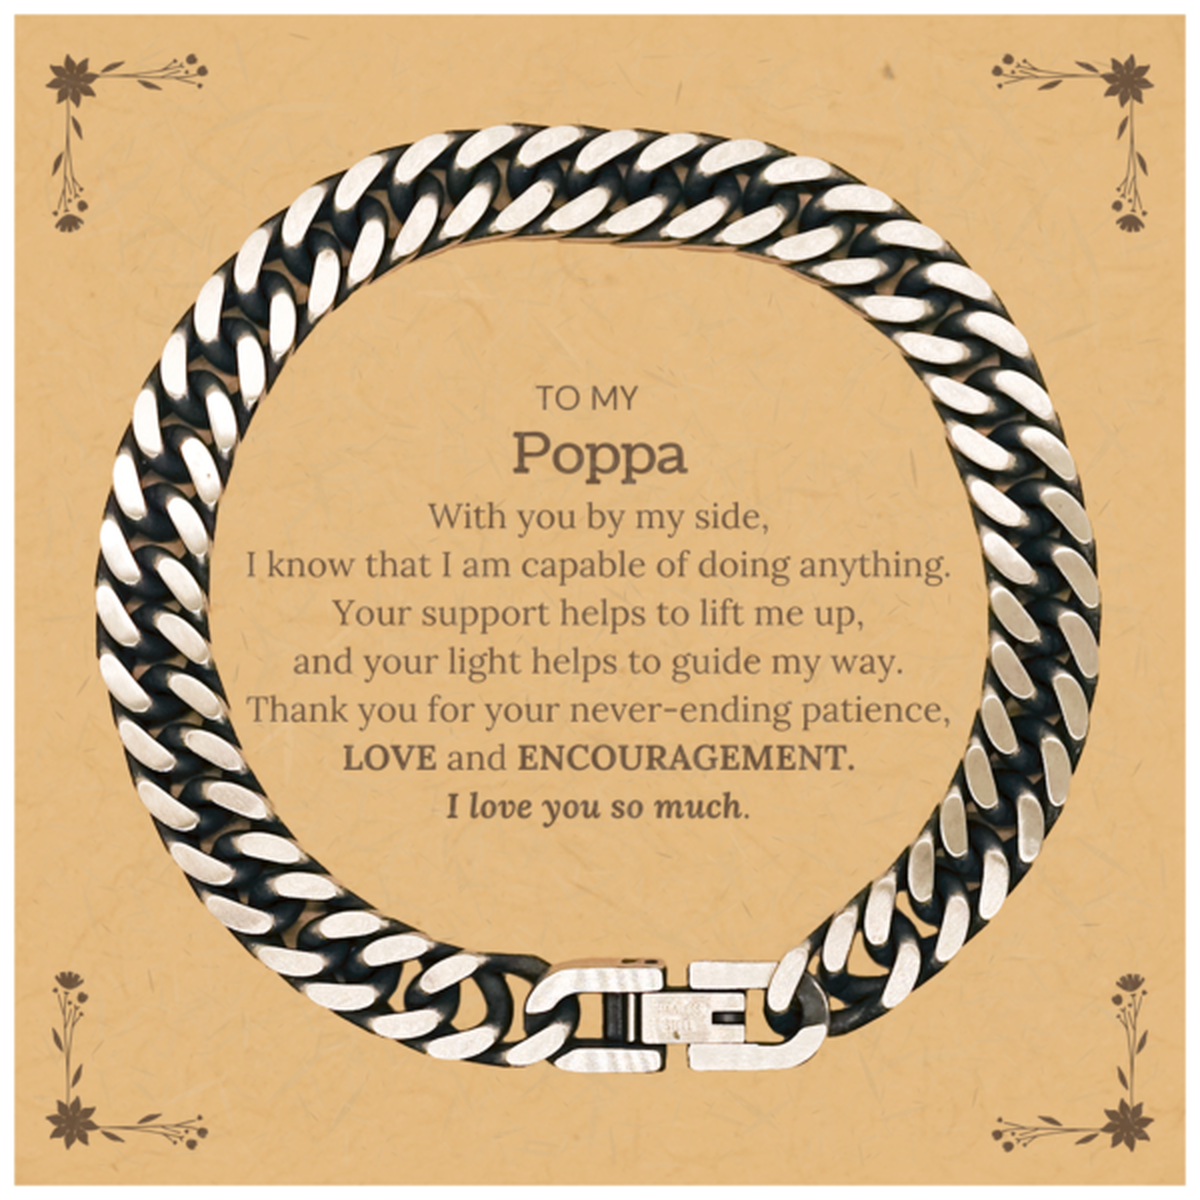 Appreciation Poppa Cuban Link Chain Bracelet Gifts, To My Poppa Birthday Christmas Wedding Keepsake Gifts for Poppa With you by my side, I know that I am capable of doing anything. I love you so much